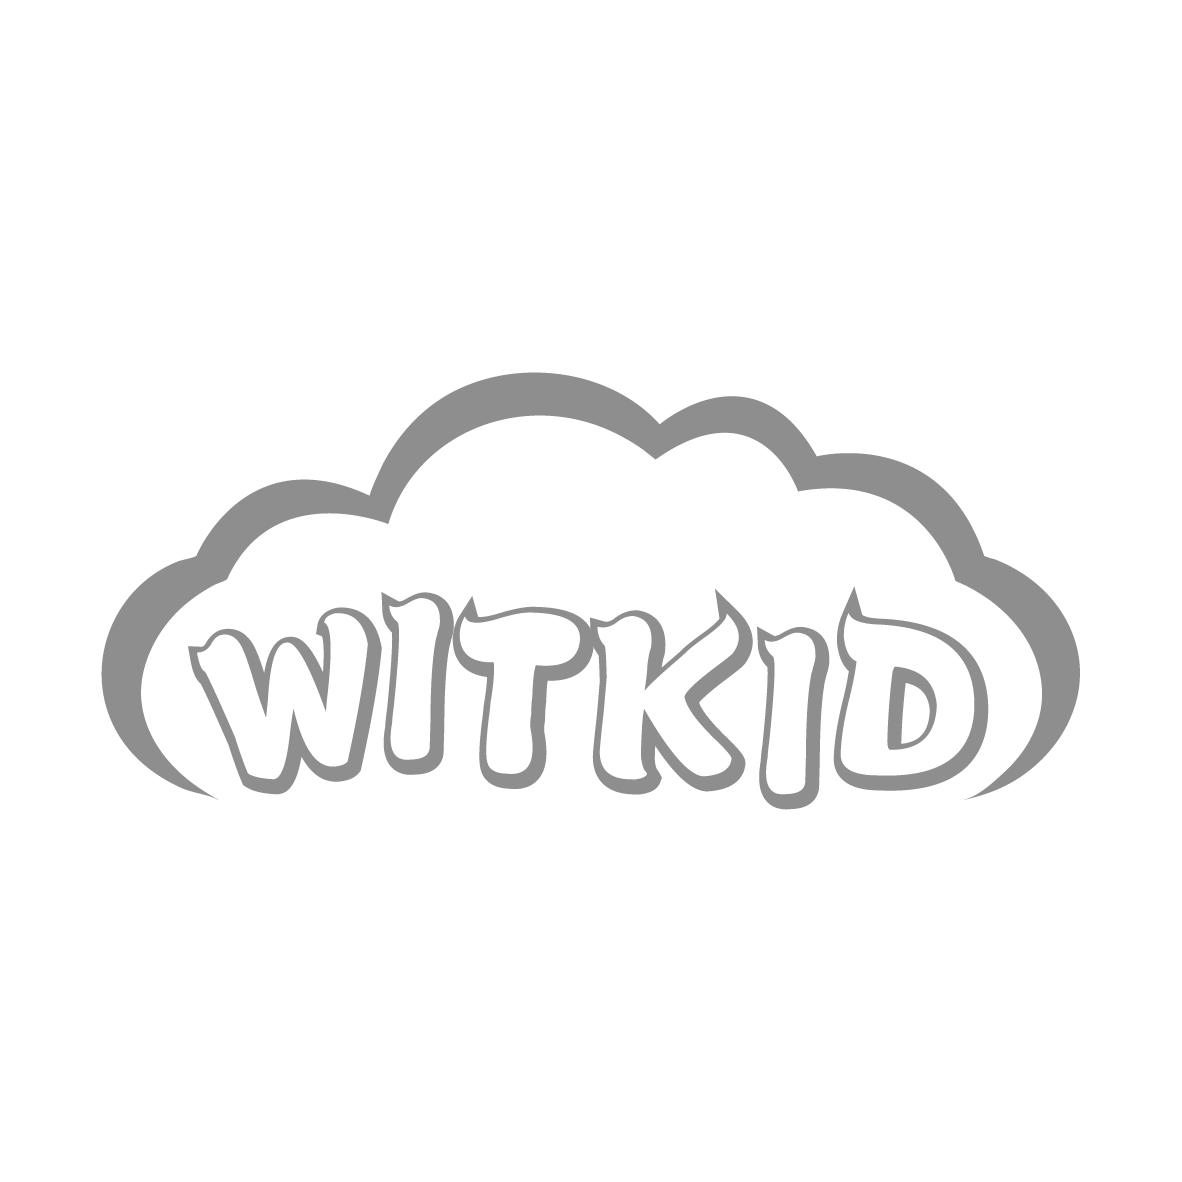 WITKID